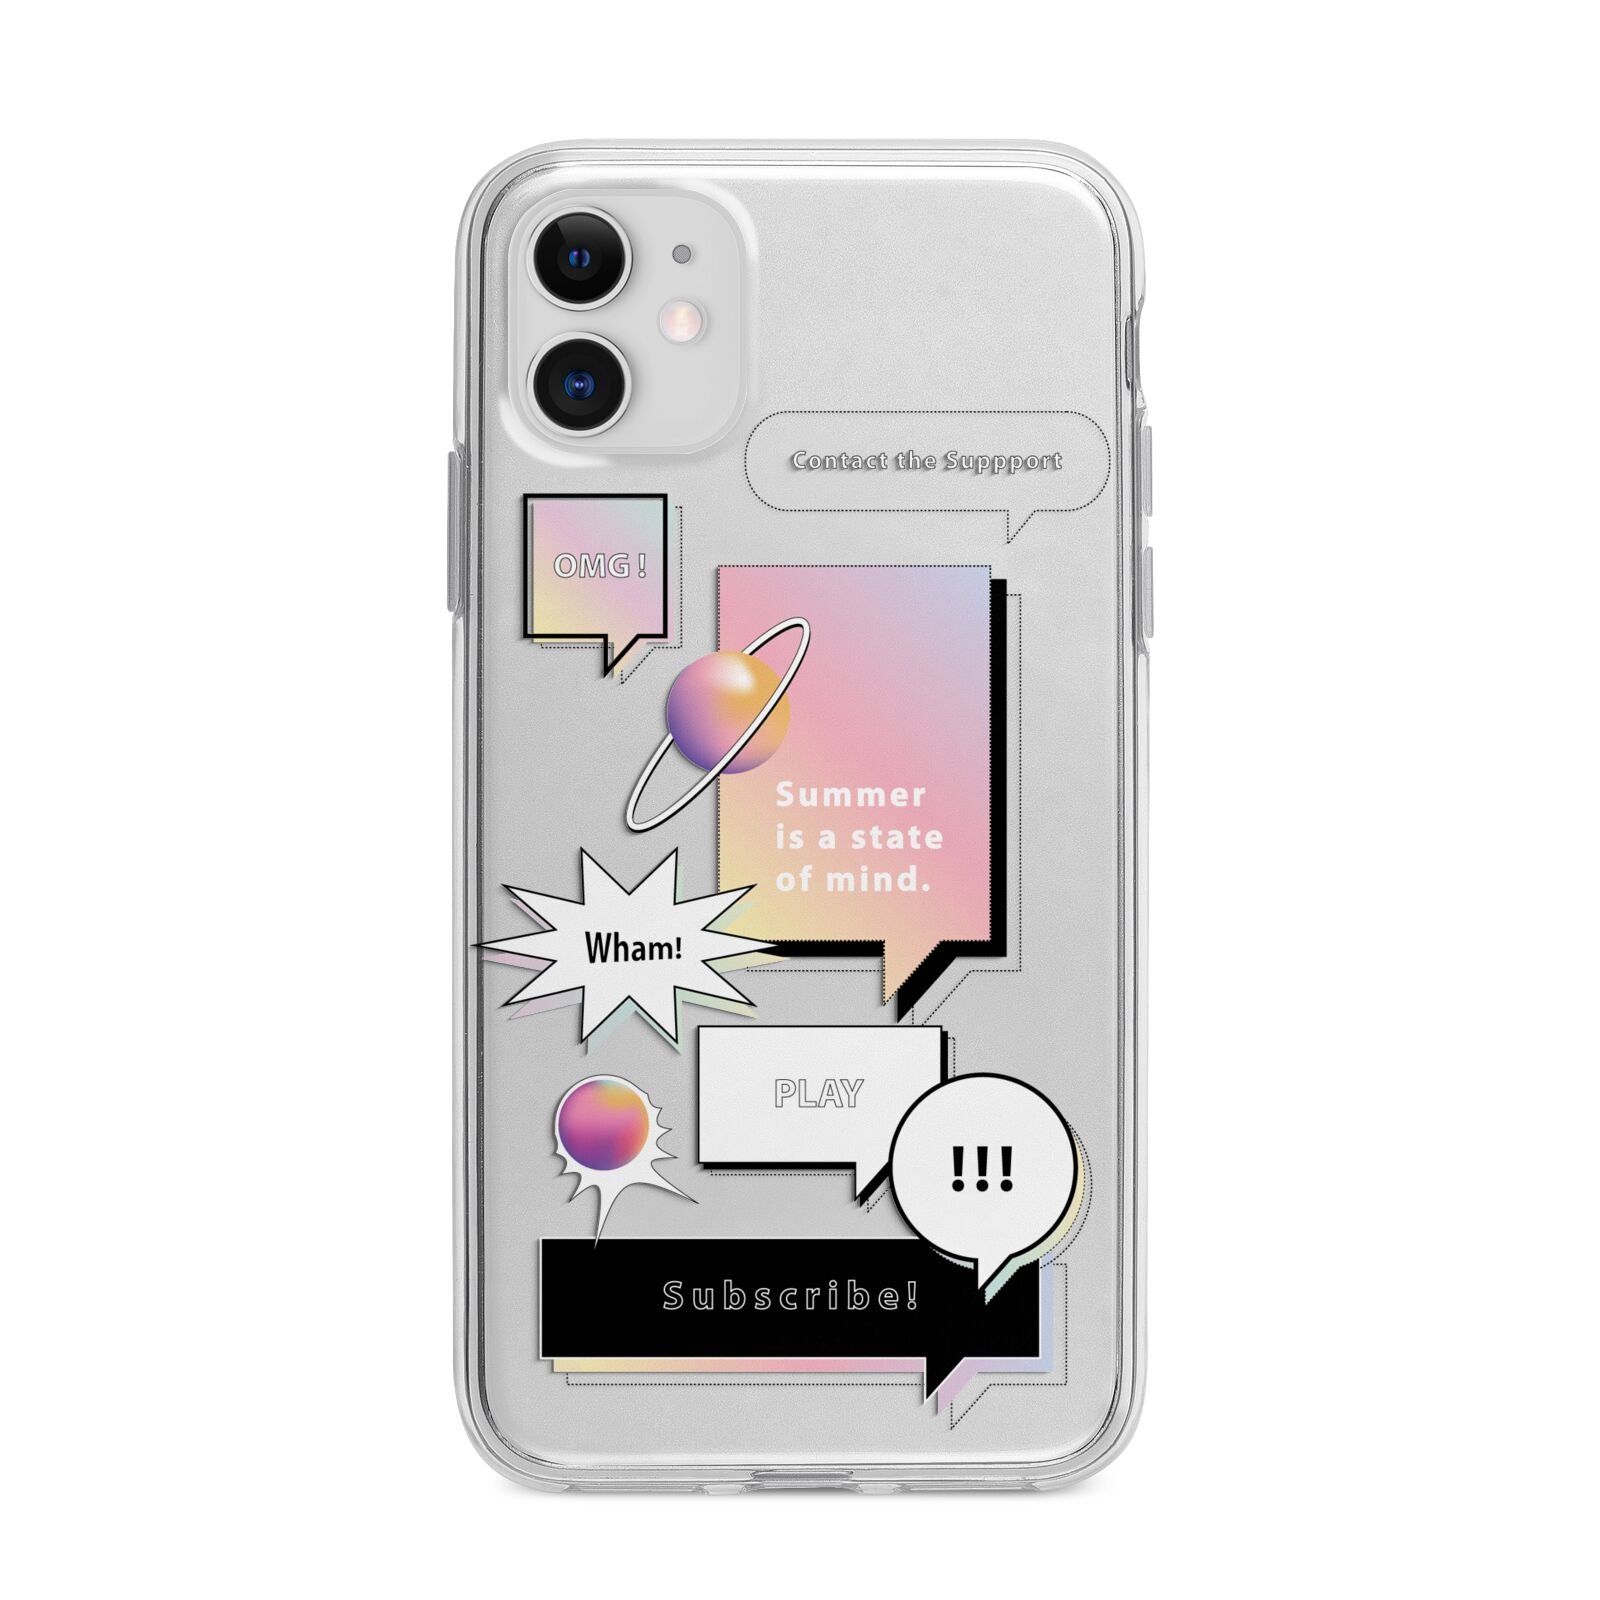 Summer Is A State Of Mind Apple iPhone 11 in White with Bumper Case